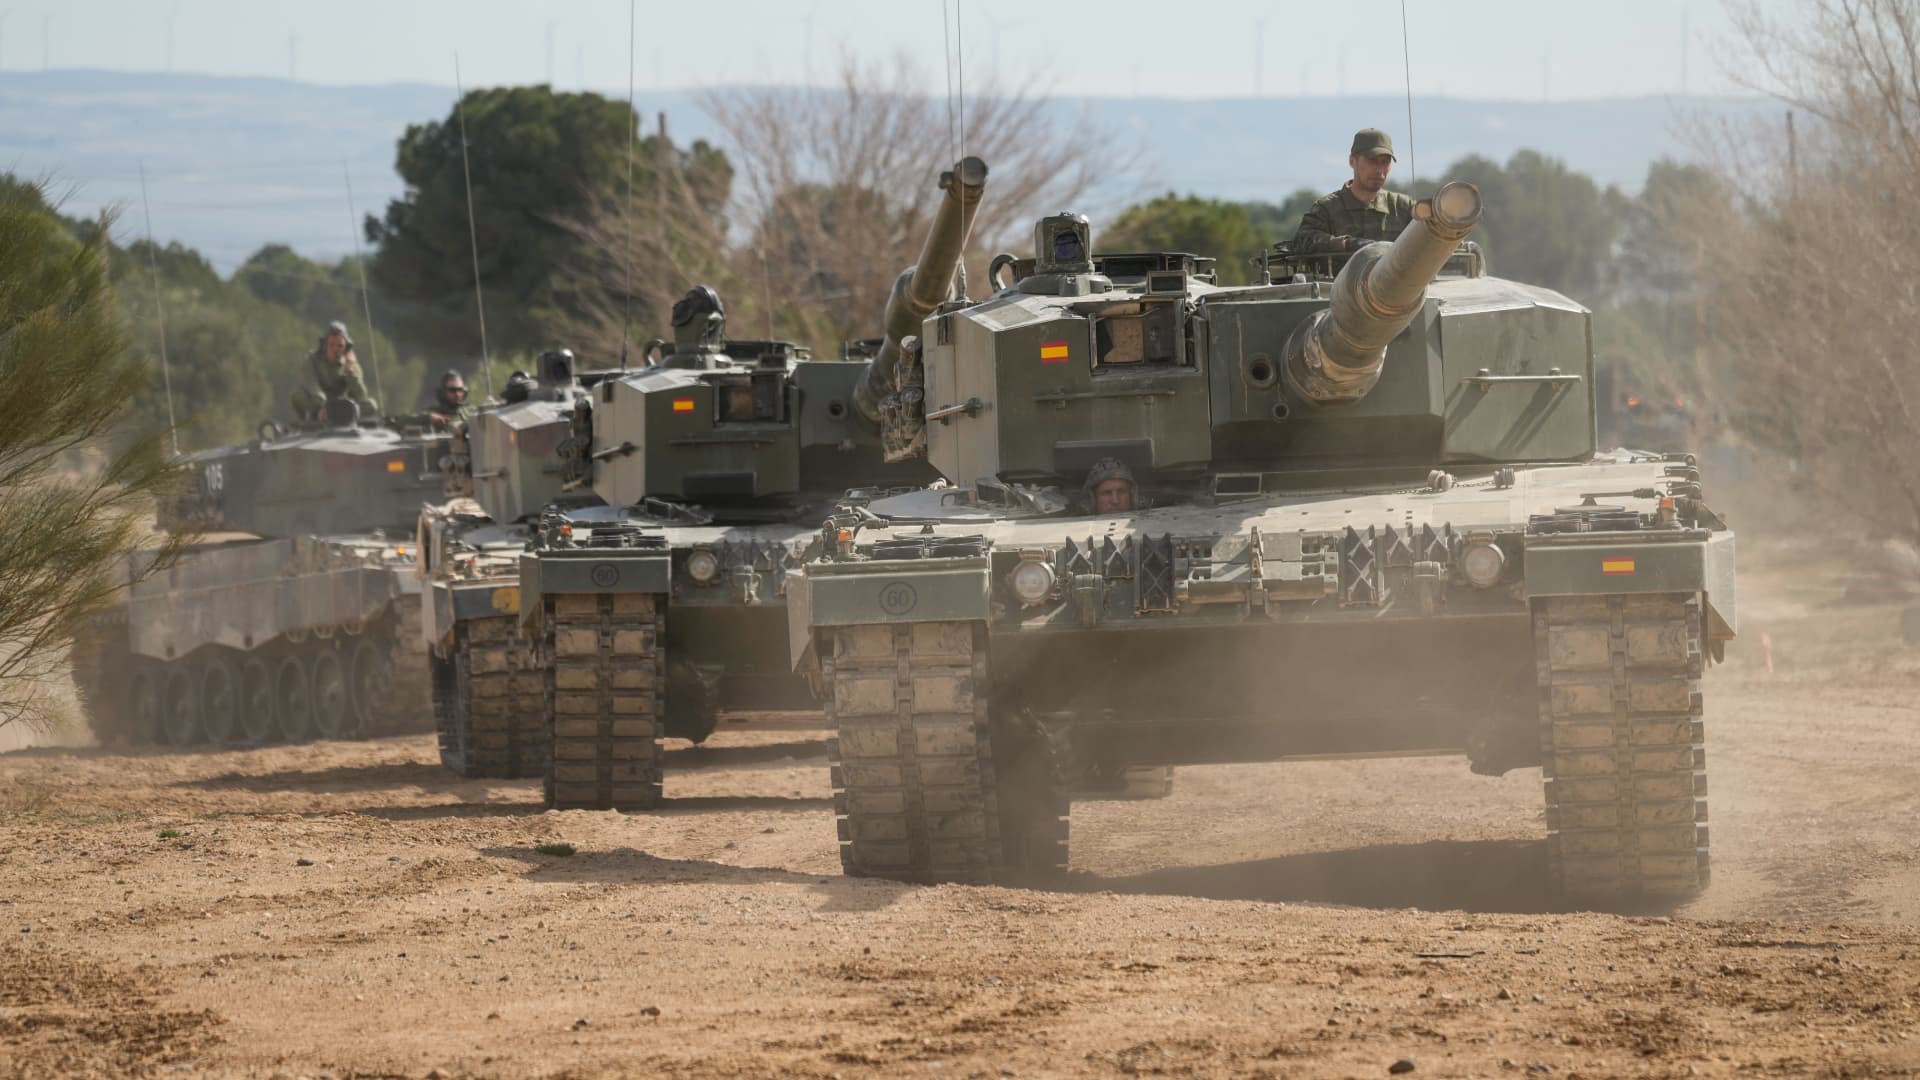 Ukrainian military personnel operate Leopard 2A4 tanks during a training exercise conducted by the Spanish military, at the San Gregorio military base outside Zaragoza, Spain, on Monday, March 13, 2023. 